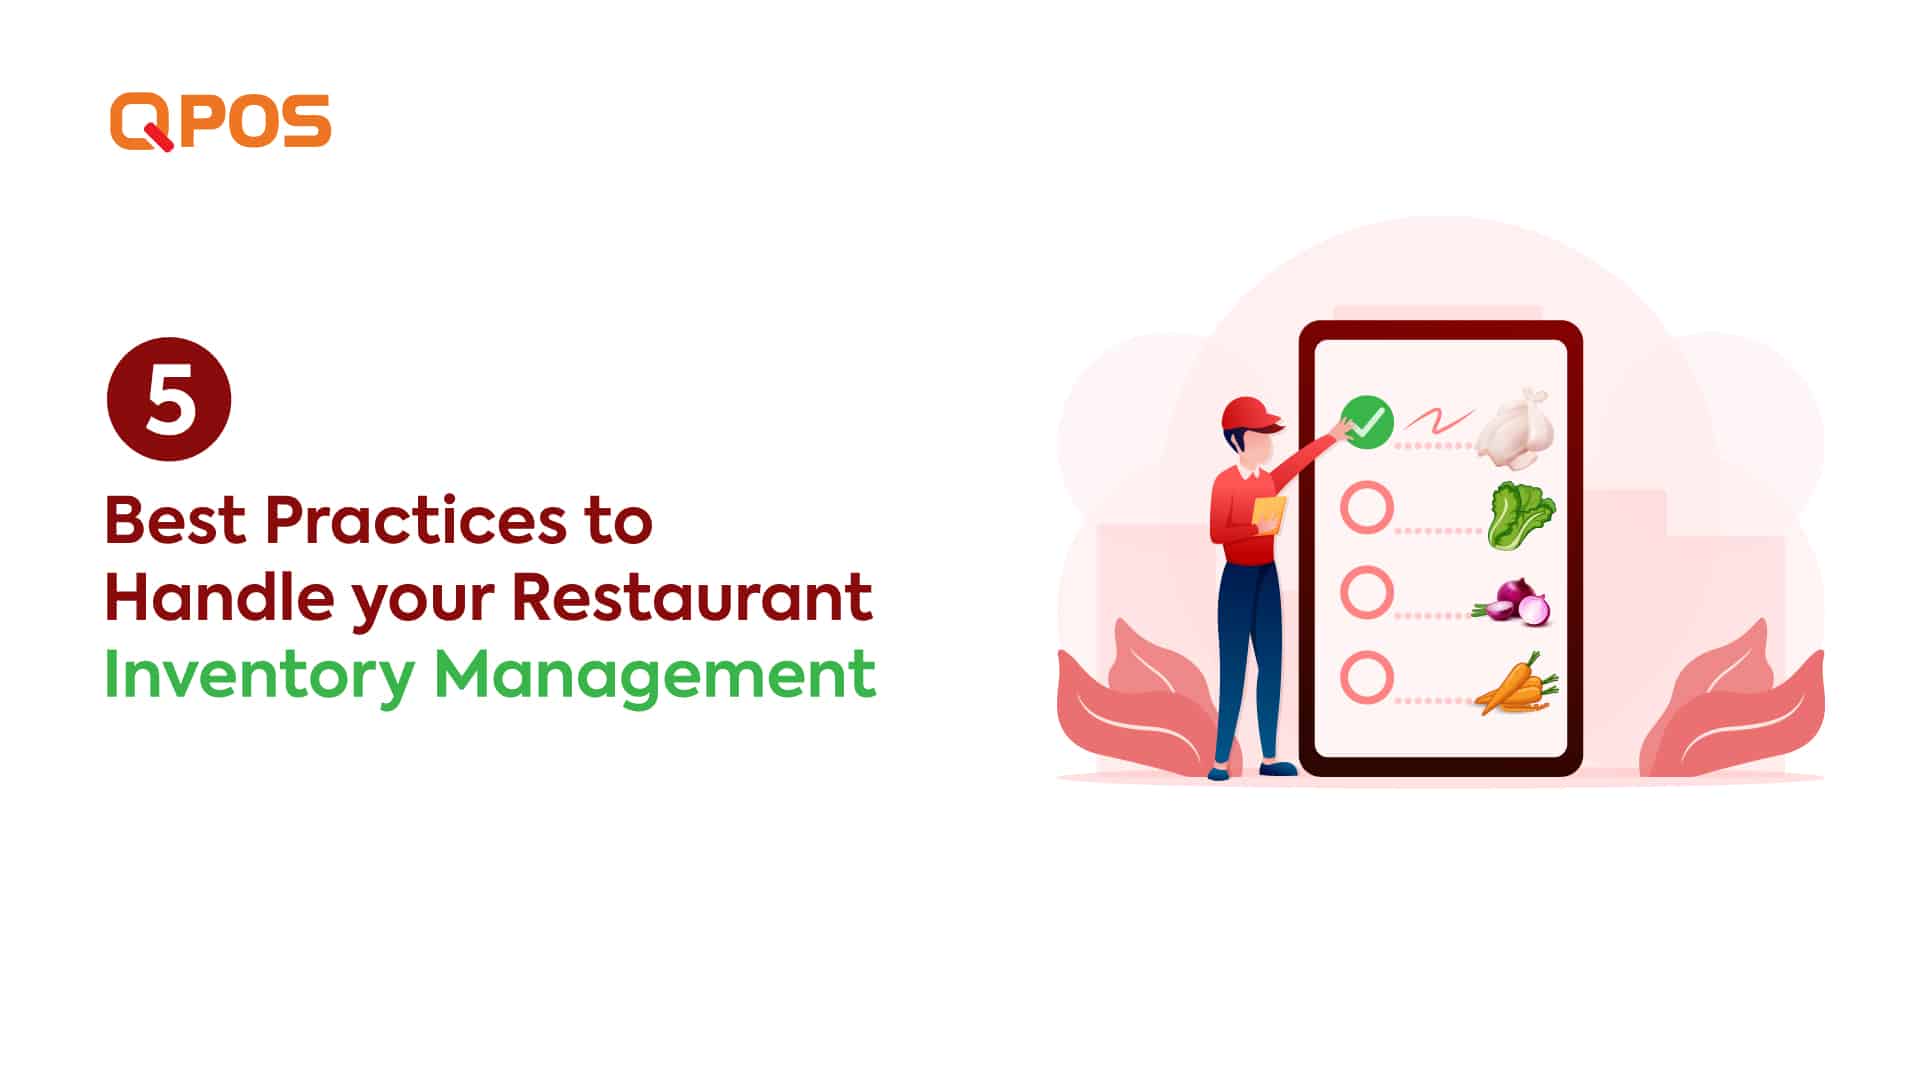 5 Best Practices to handle your Restaurant Inventory Management